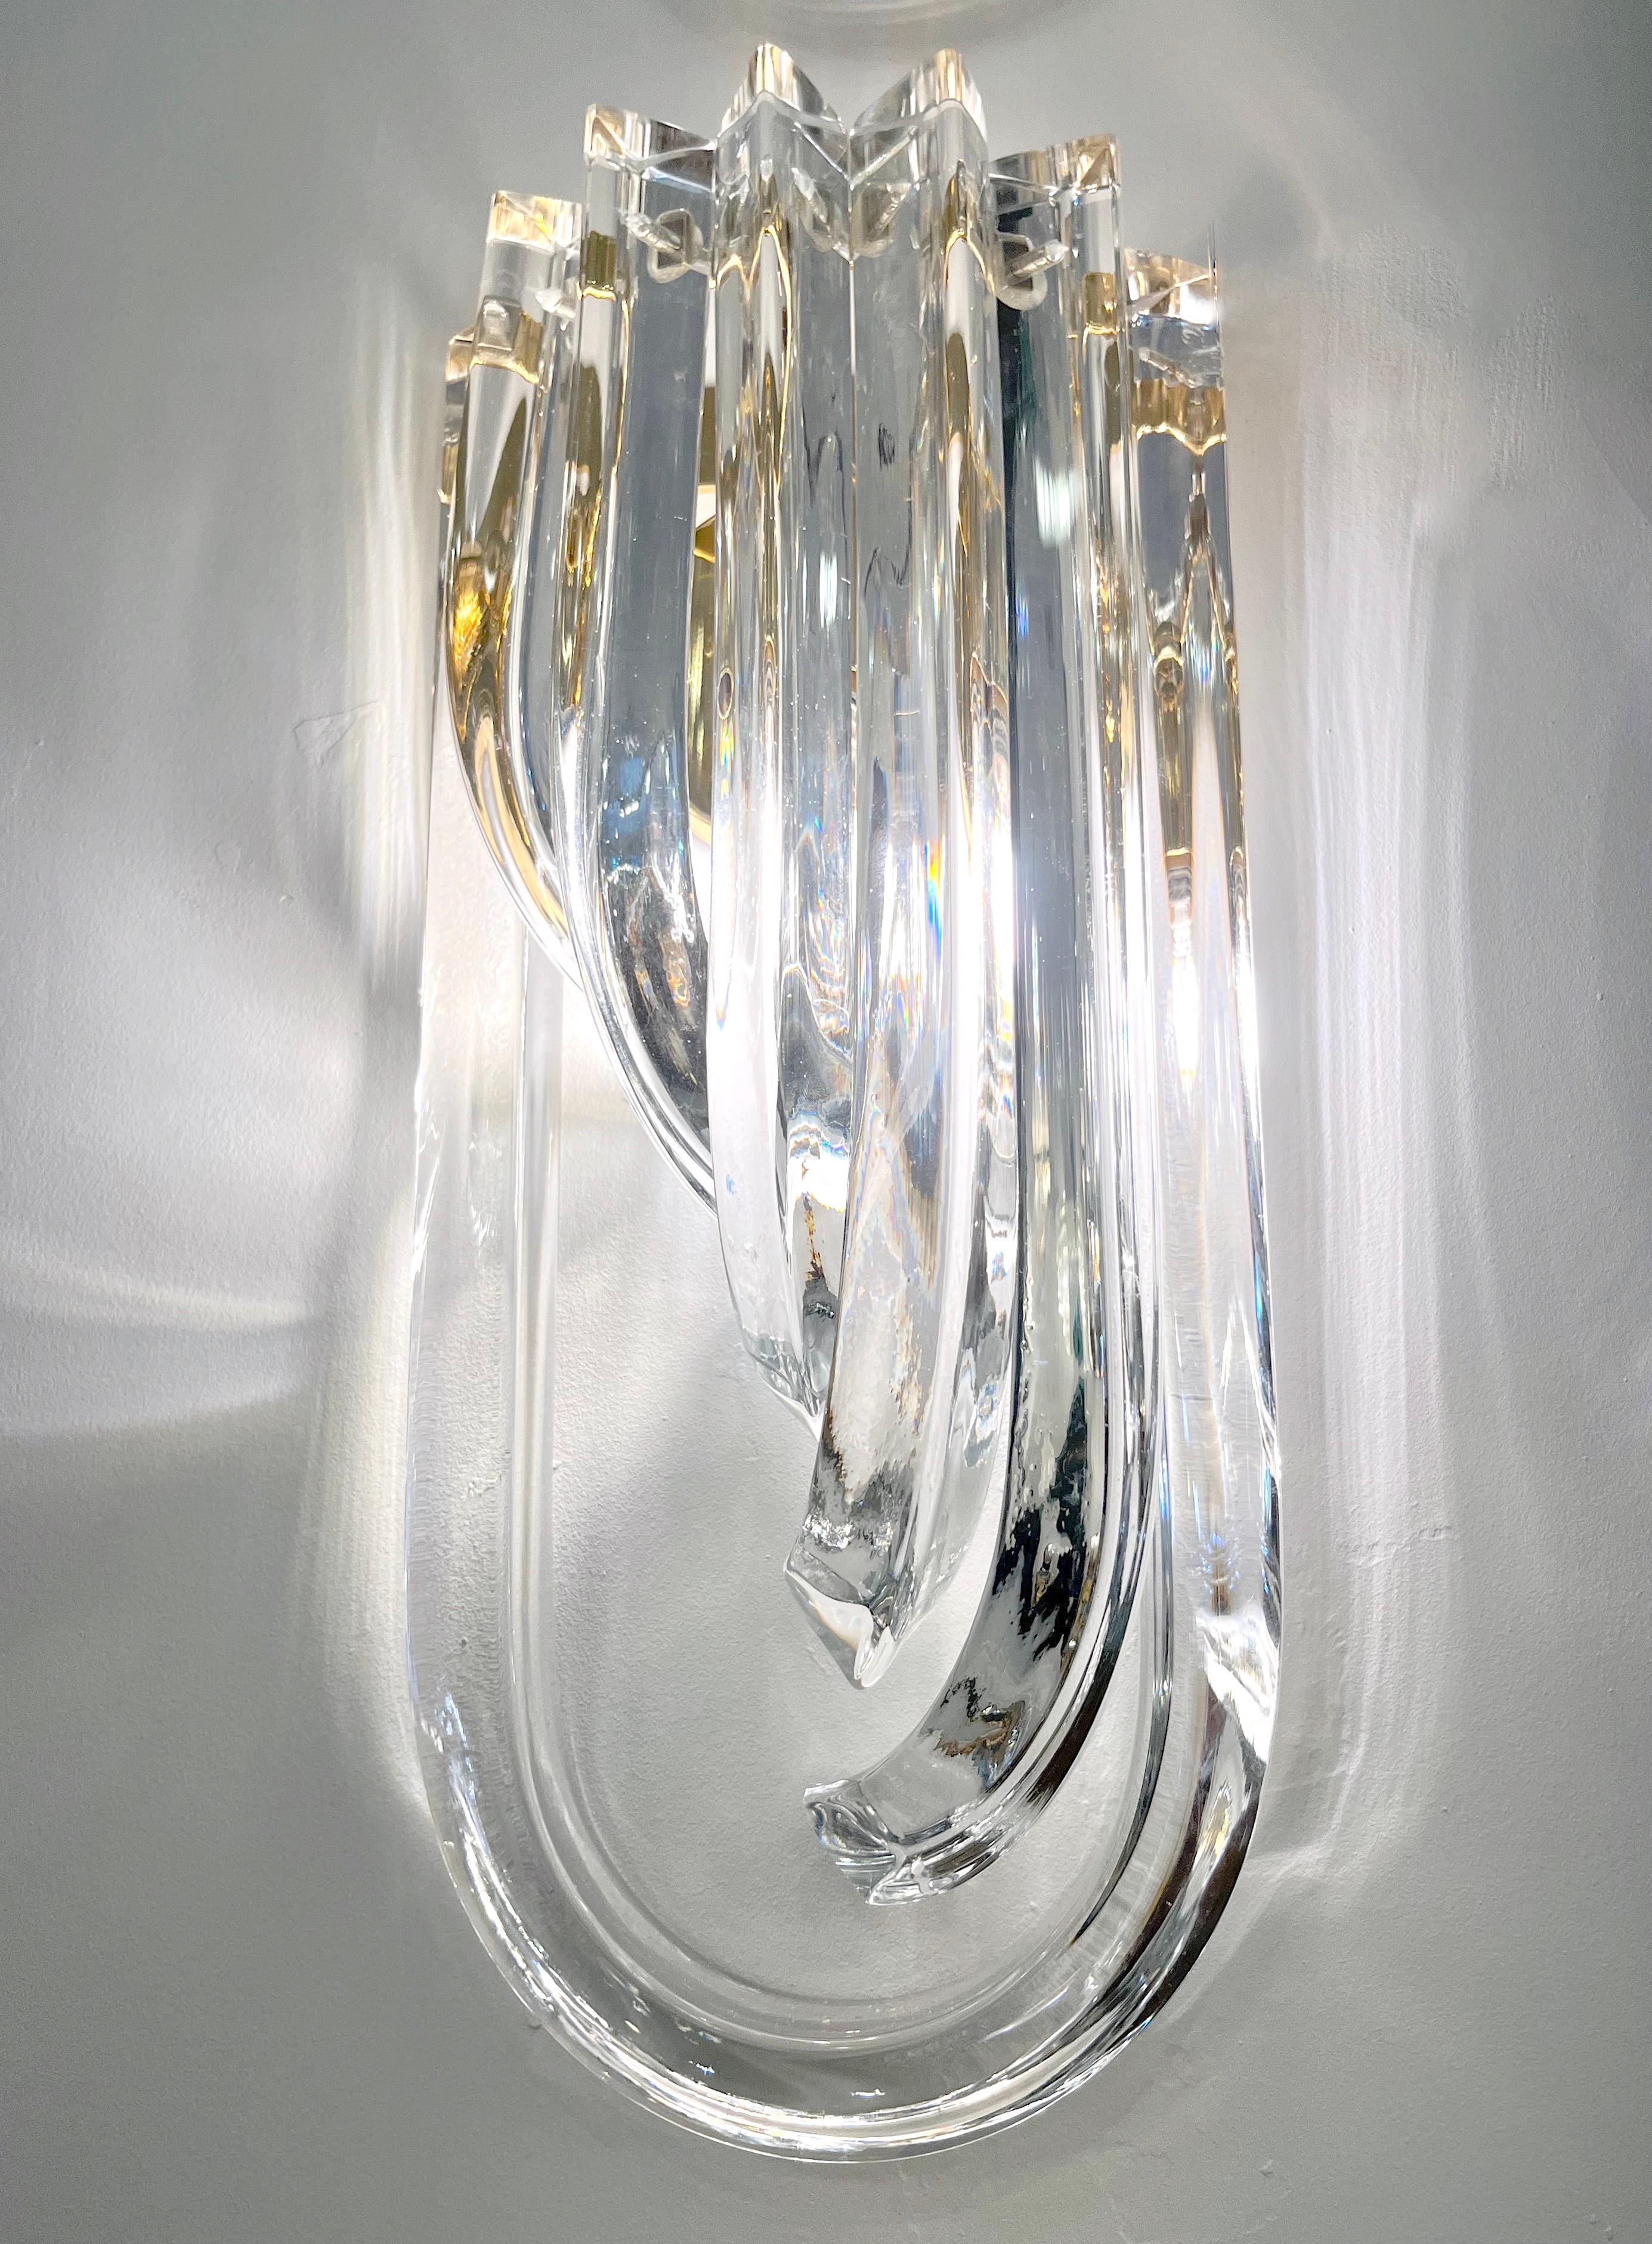 Very sleek elegant Venetian modernist pair of wall lights with organic Minimalist design and Art Deco flair, consisting of six embracing spectacular curved ribbon rods, in crystal clear blown Murano glass, each with a triangular section that